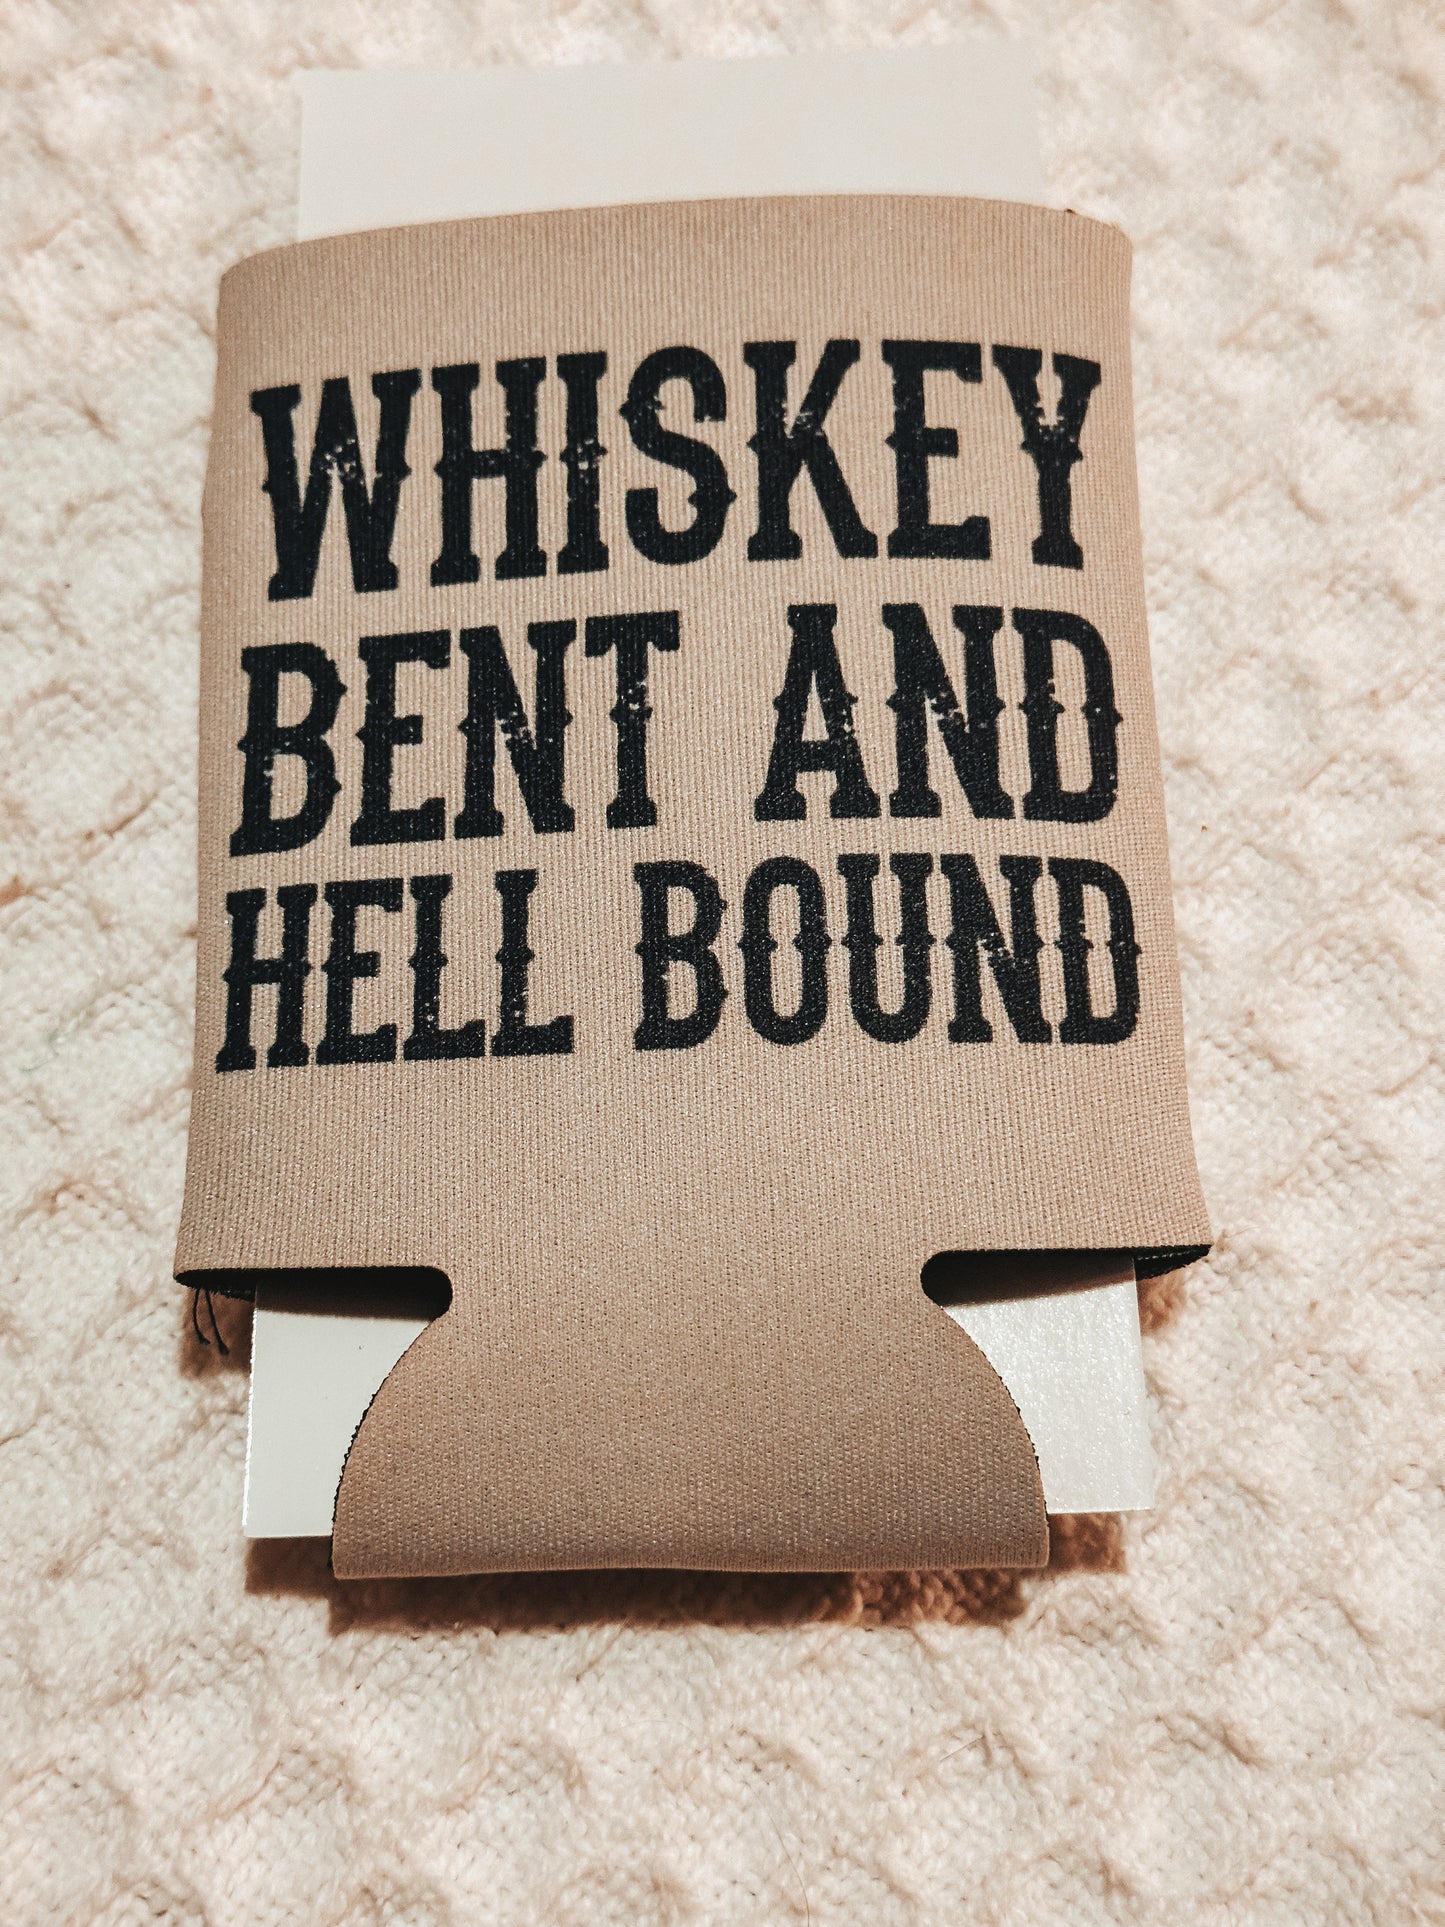 Whiskey Bent and Hell abound